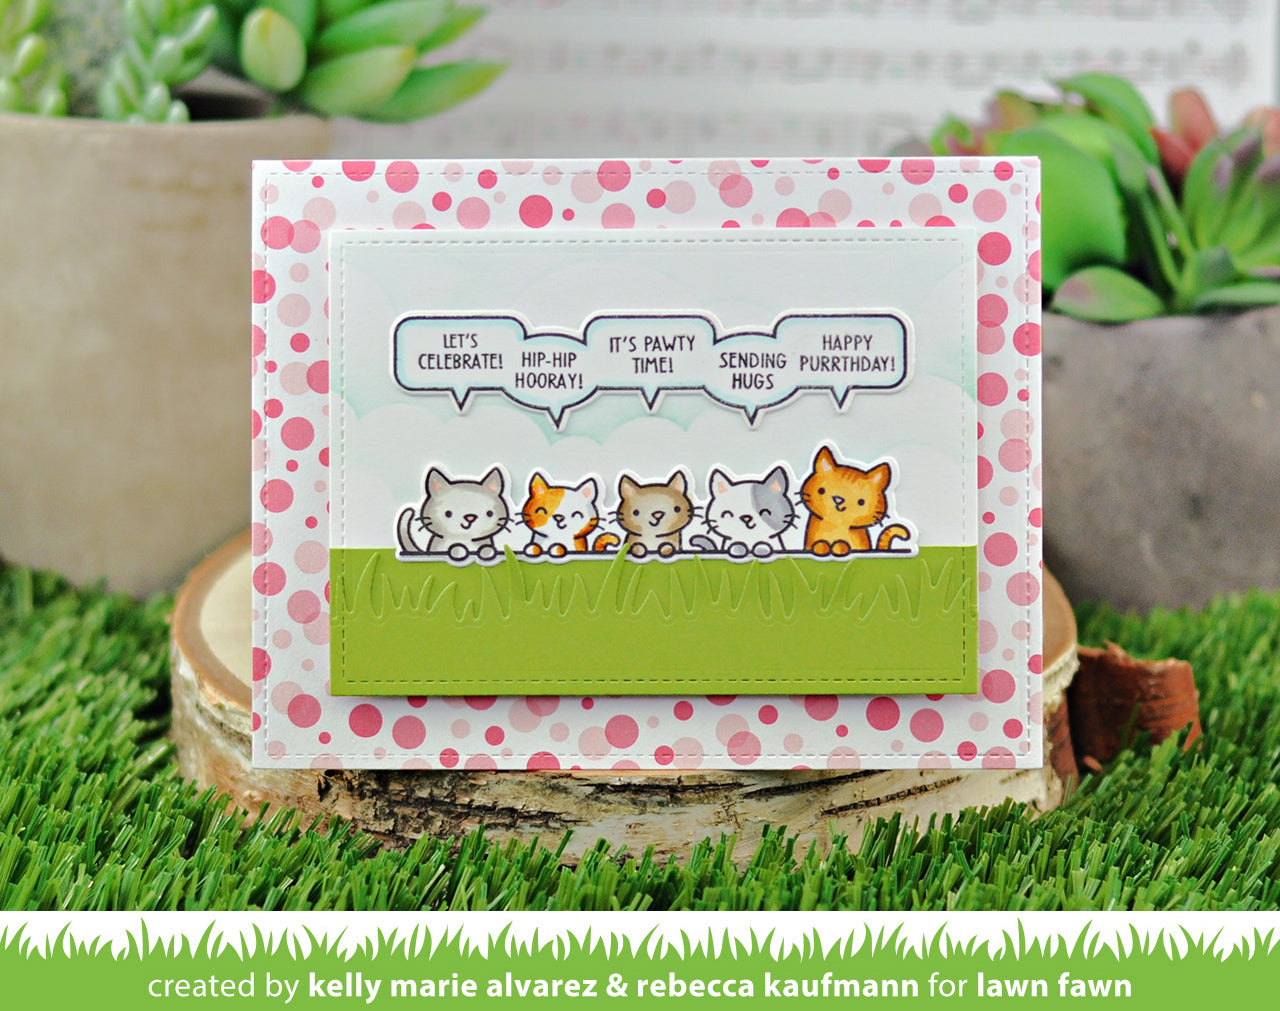 simply celebrate critters add-on